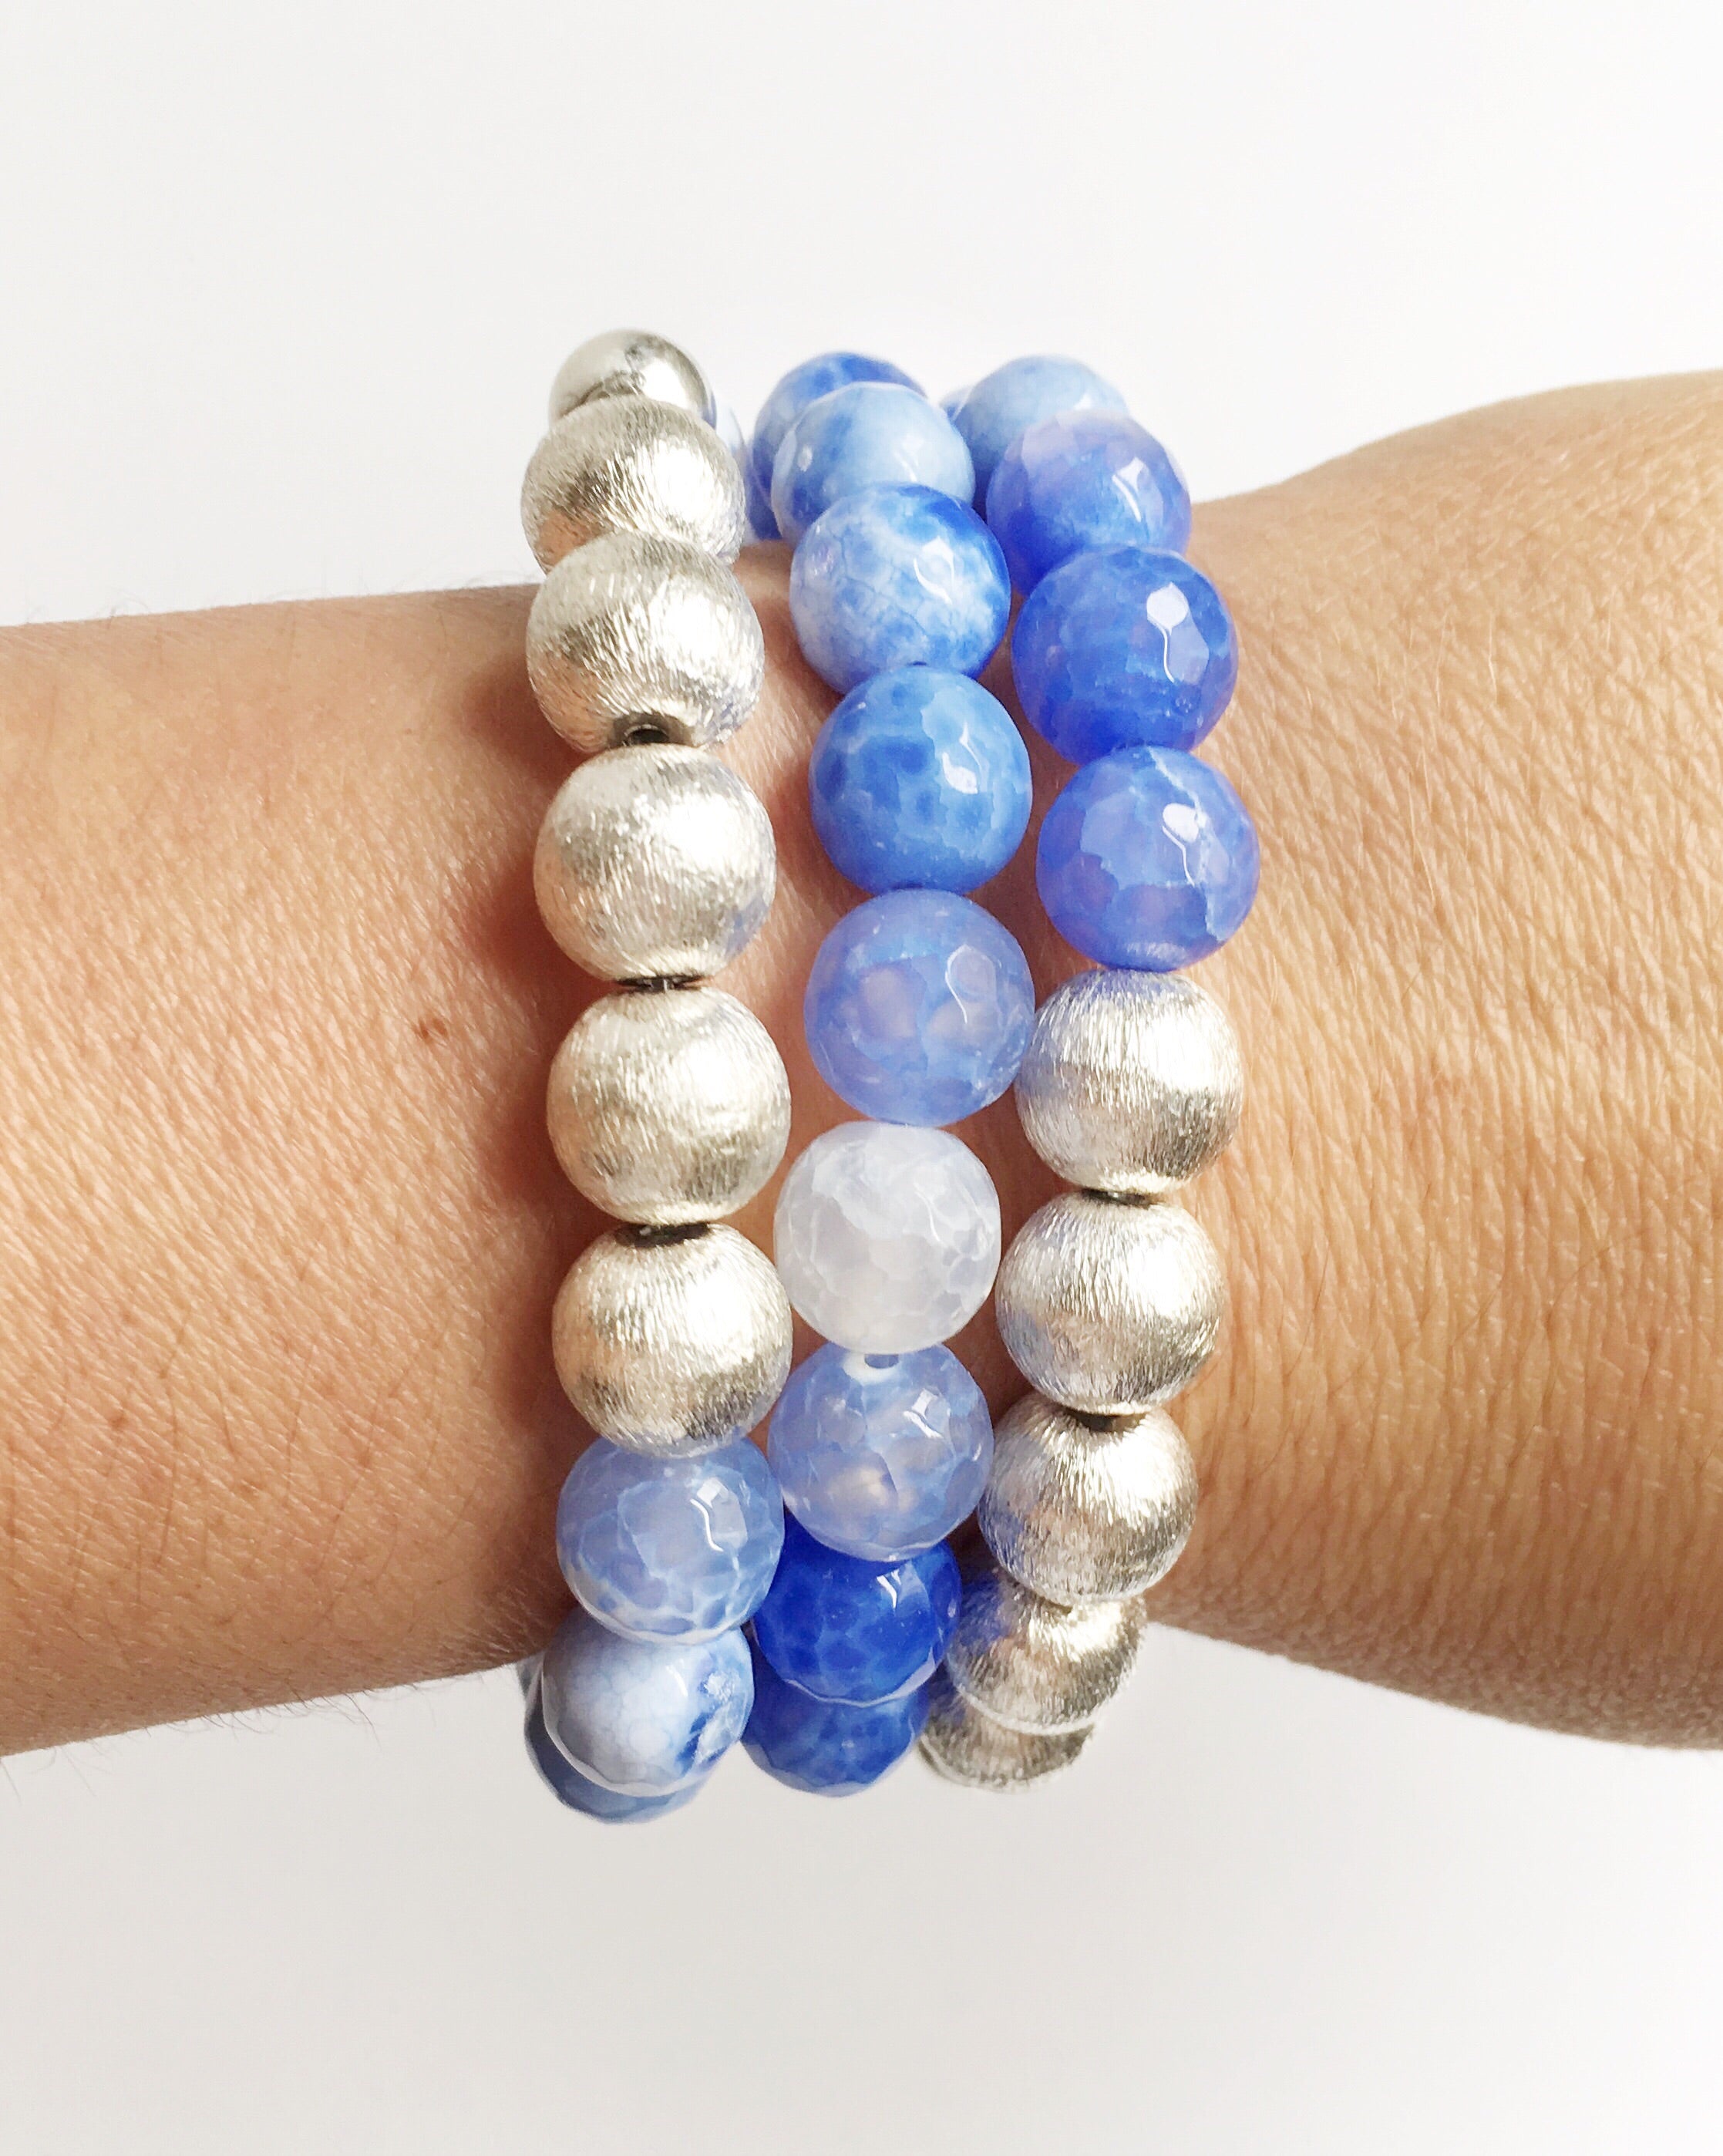 Three White and Blue Lace Agate and Silver Stacking Beaded Bracelets on women's wrist